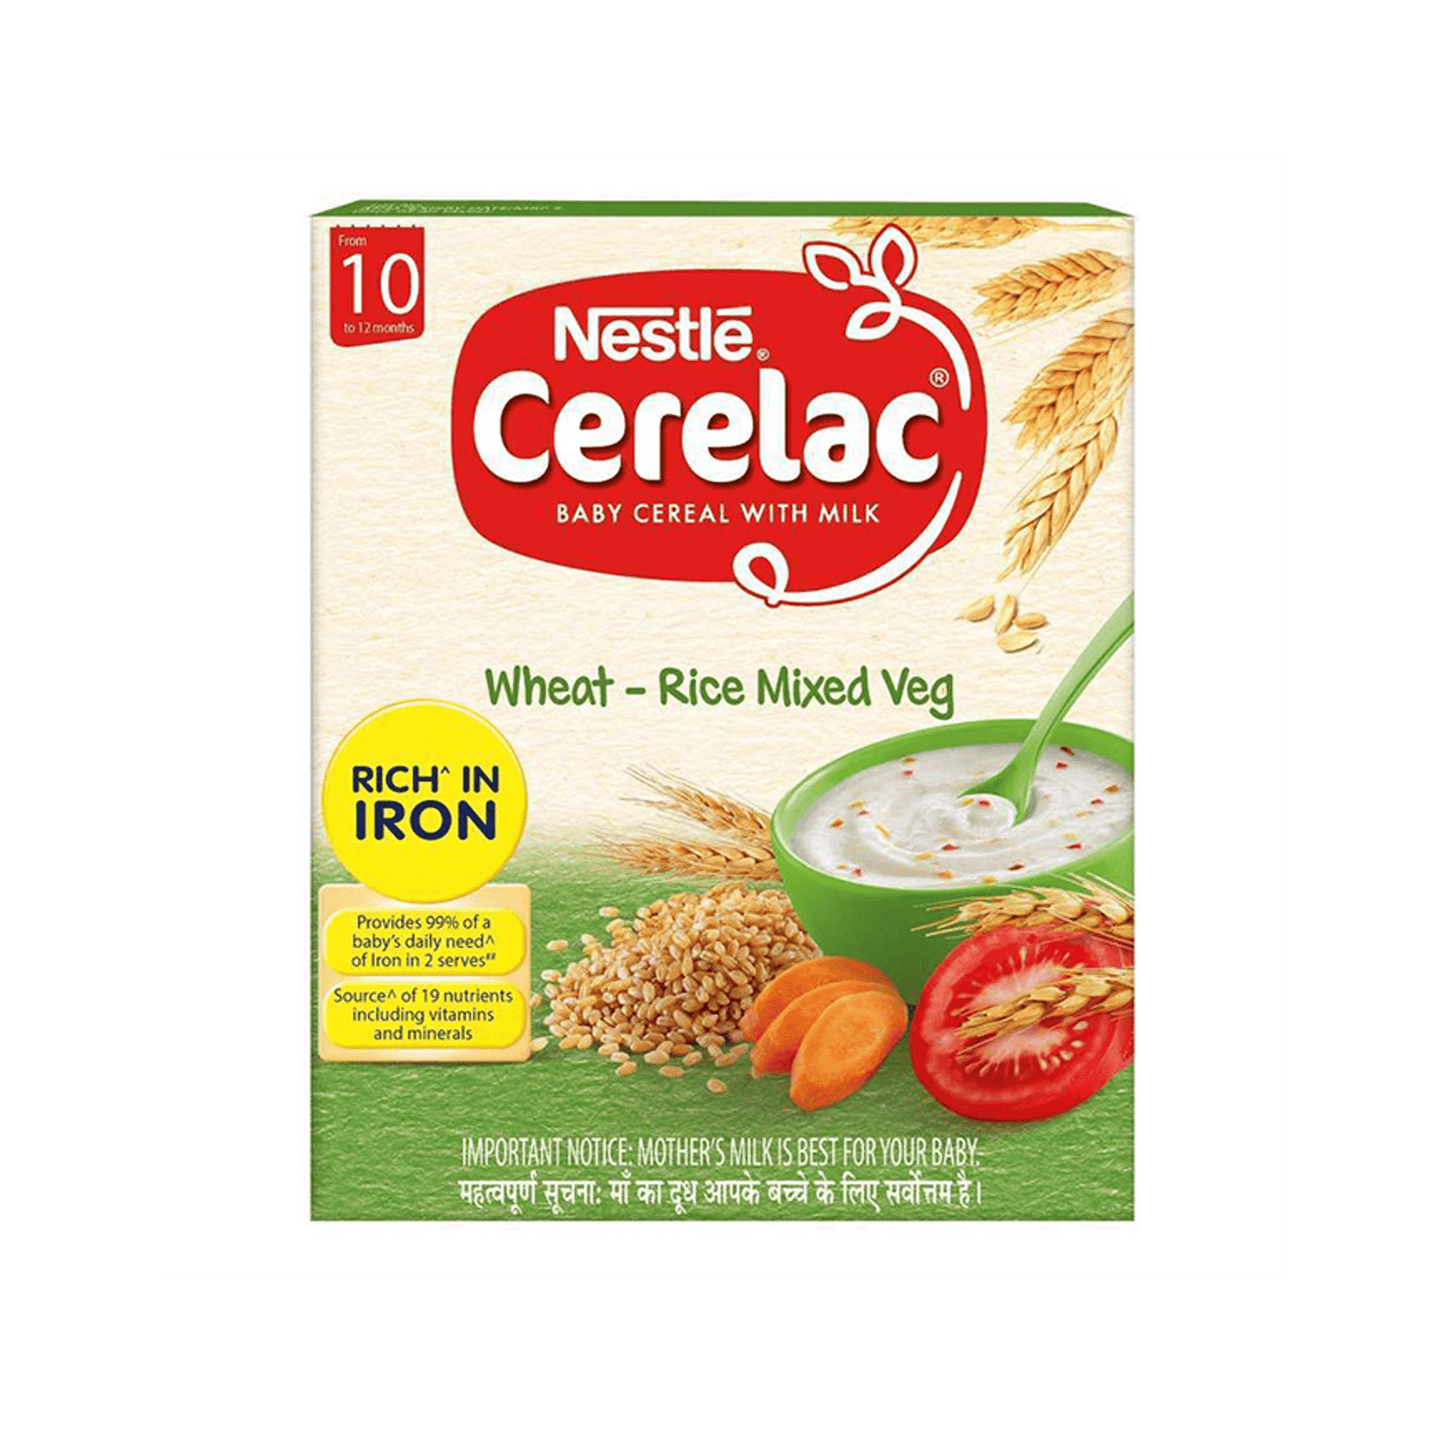 Nestle Cerelac with Milk - Wheat Rice & Mix Vegetables | From 10 Months.